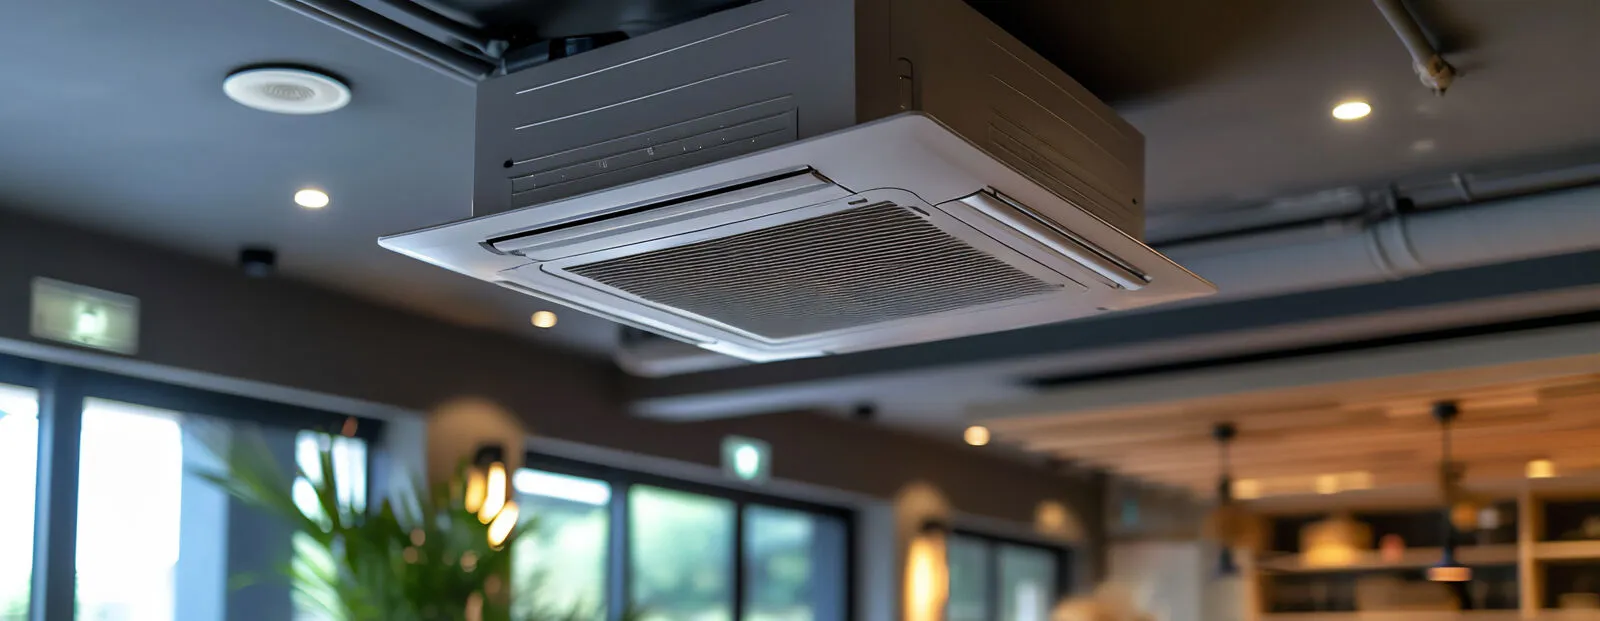 Ceiling mounted cassette type air conditioner.jpg